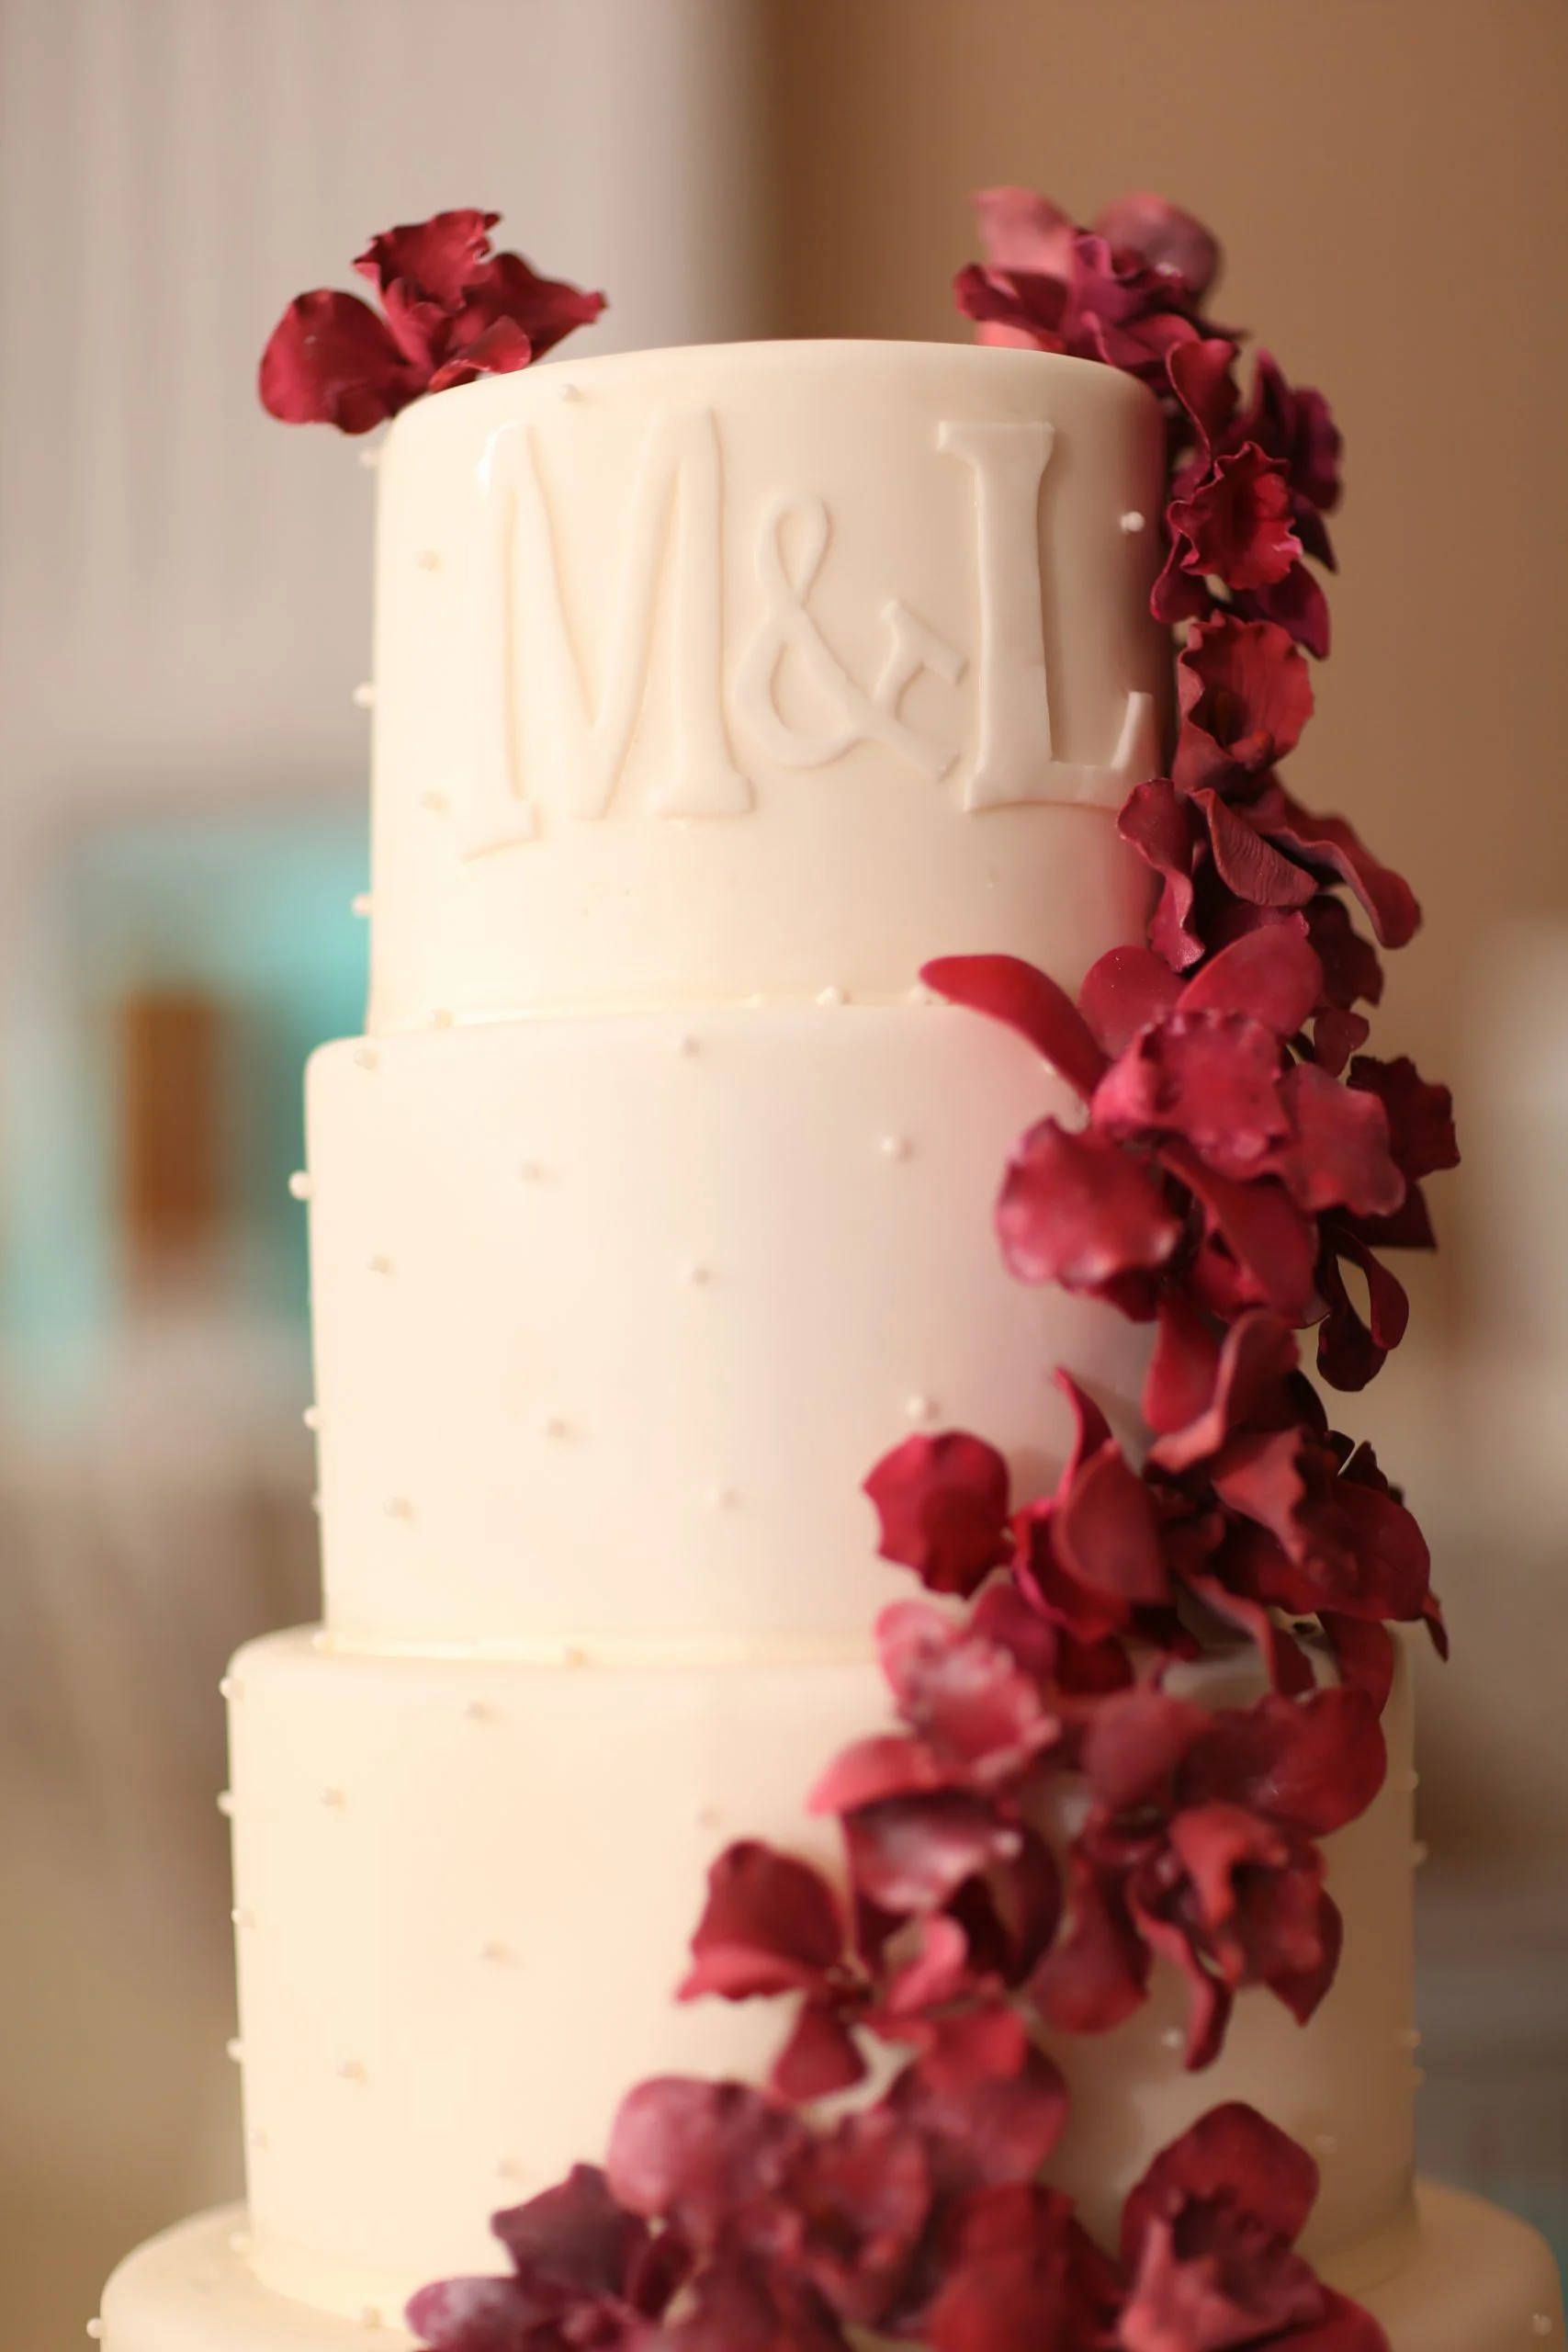 A white wedding cake with red flowers.